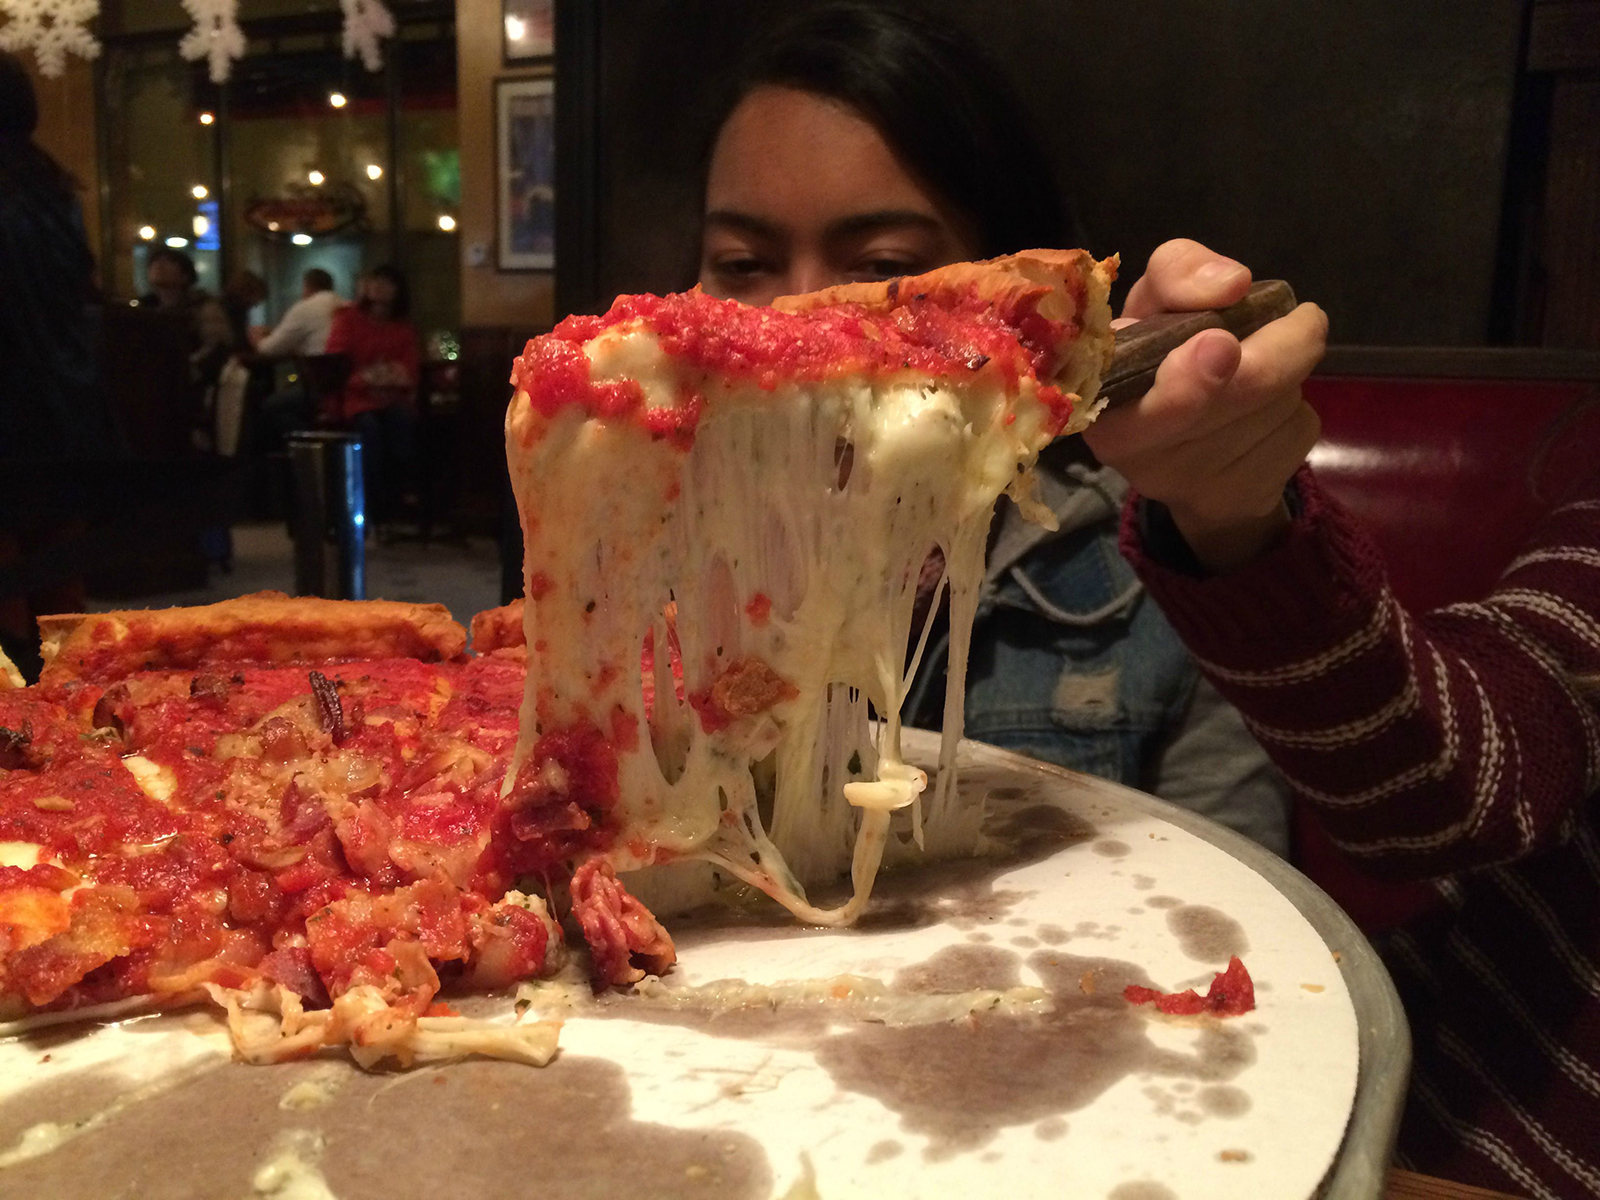 Chicago-style deep-dish pizza at Giordano's Pizzeria.